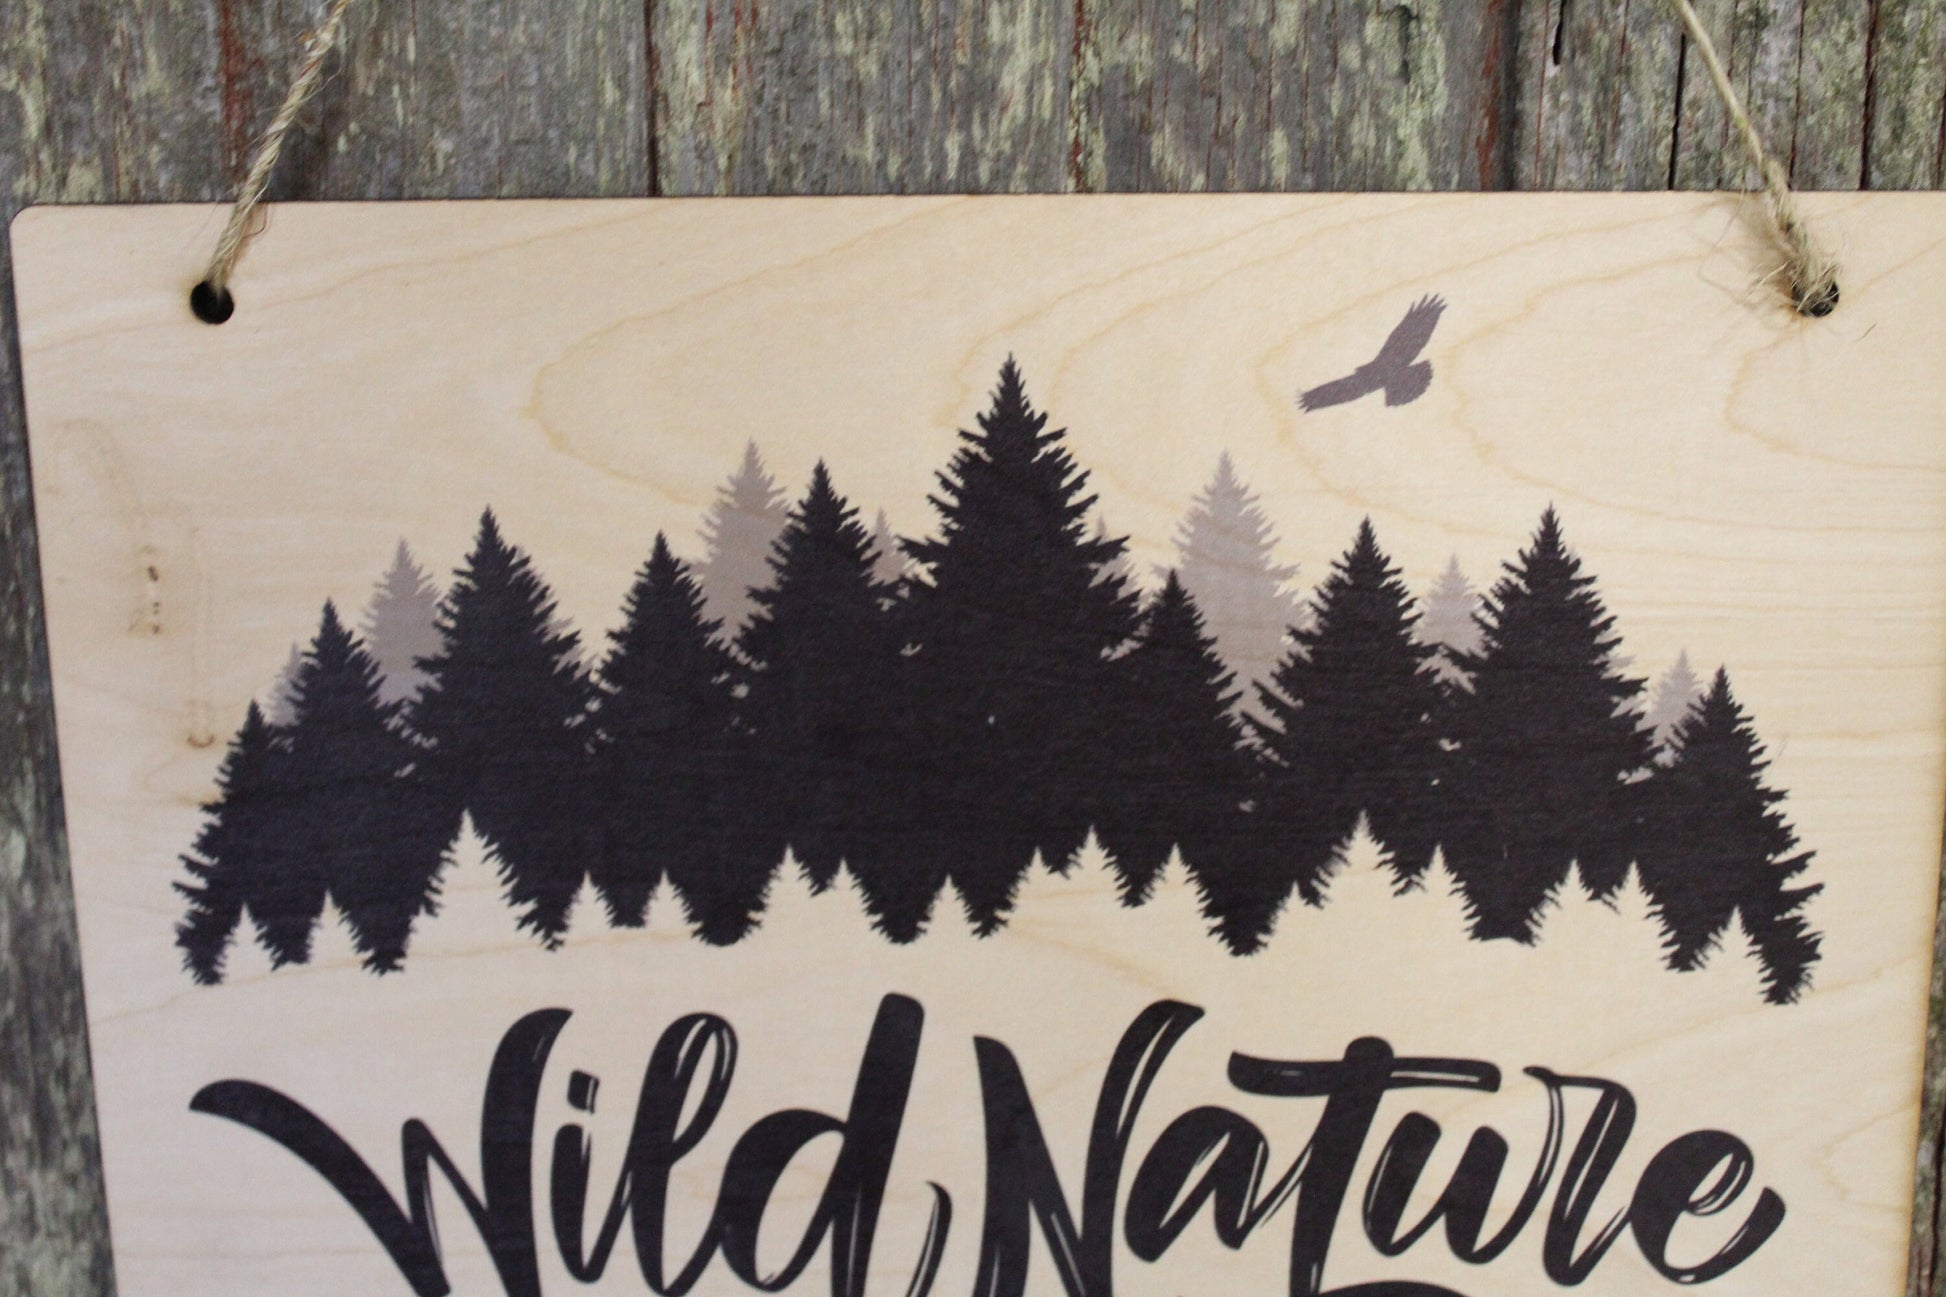 Wilderness Outdoors Open Space Wild Nature Mountain Range Eagle Adventure Sign Rustic Wooden Wall Decor Art Wood Print